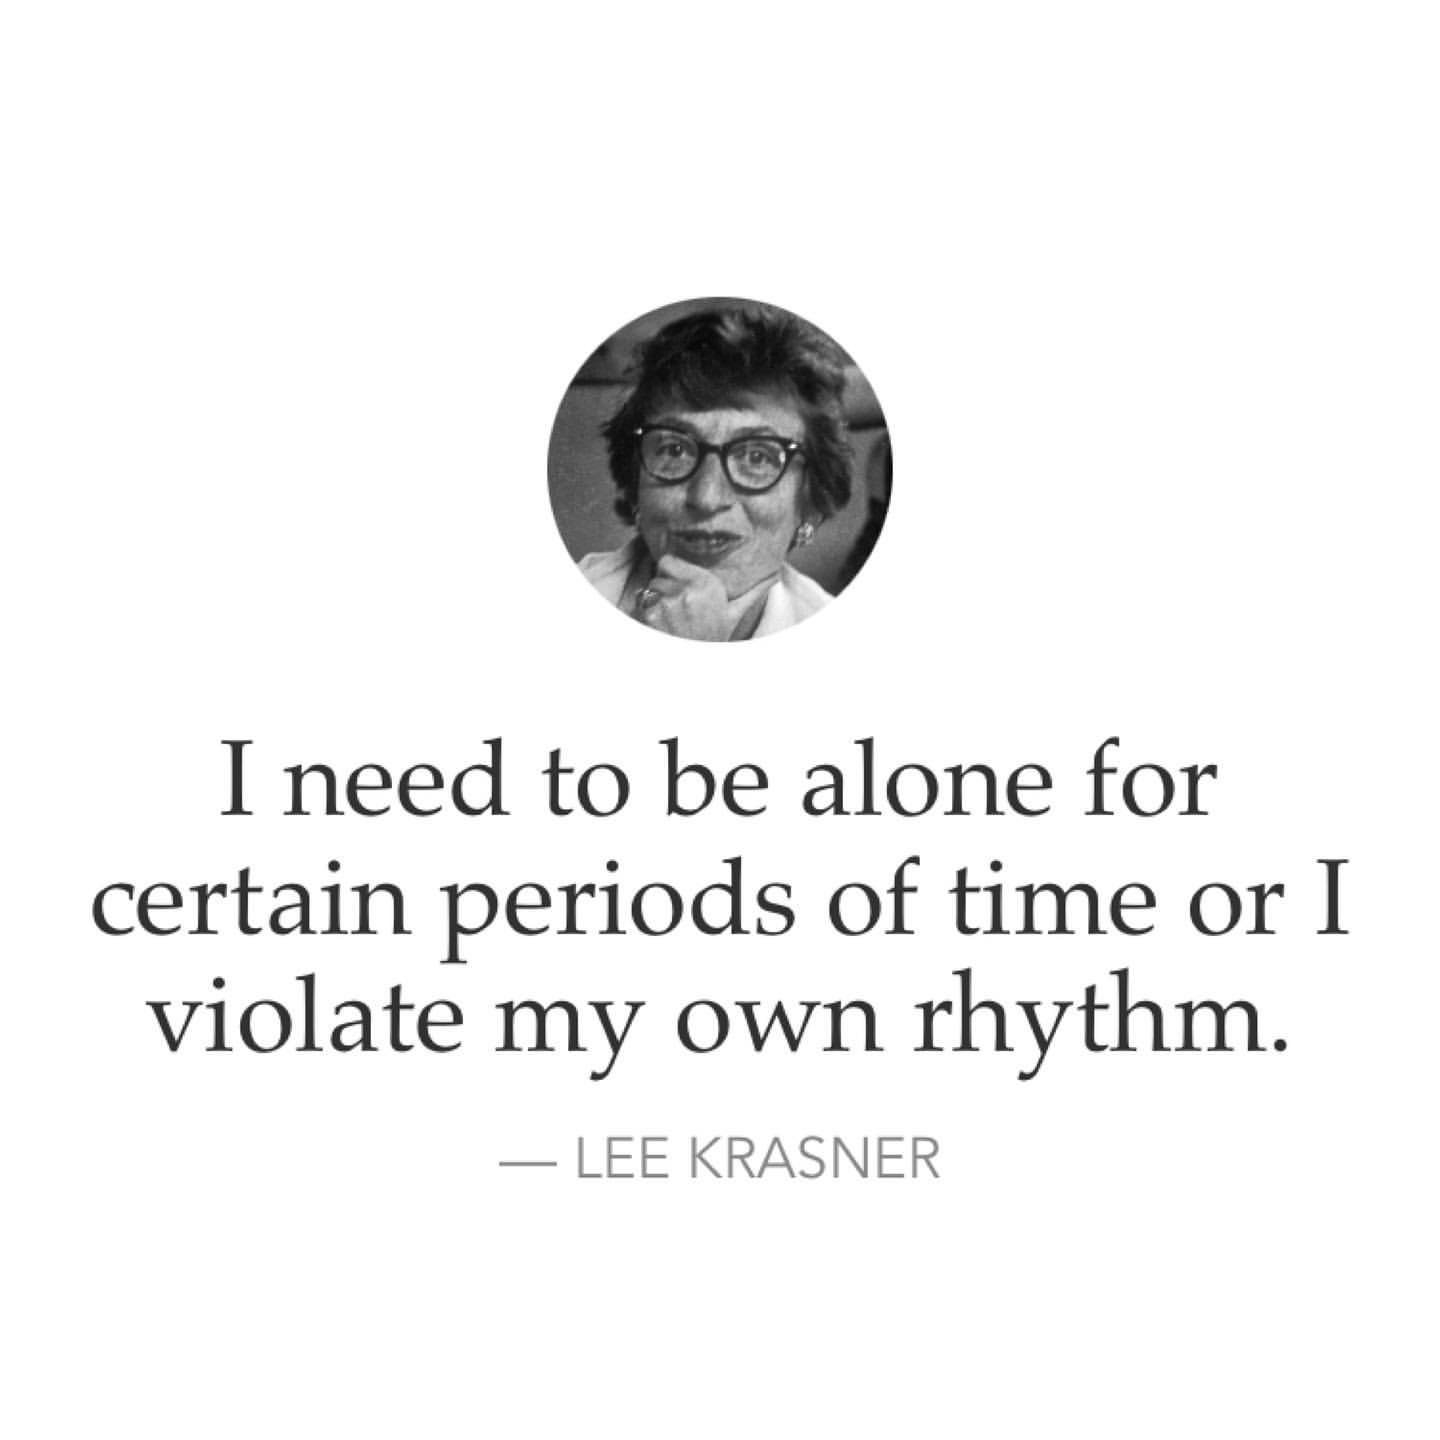 I need to be alone for certain periods of time or I violate my own rhythm. Lee Krasner.